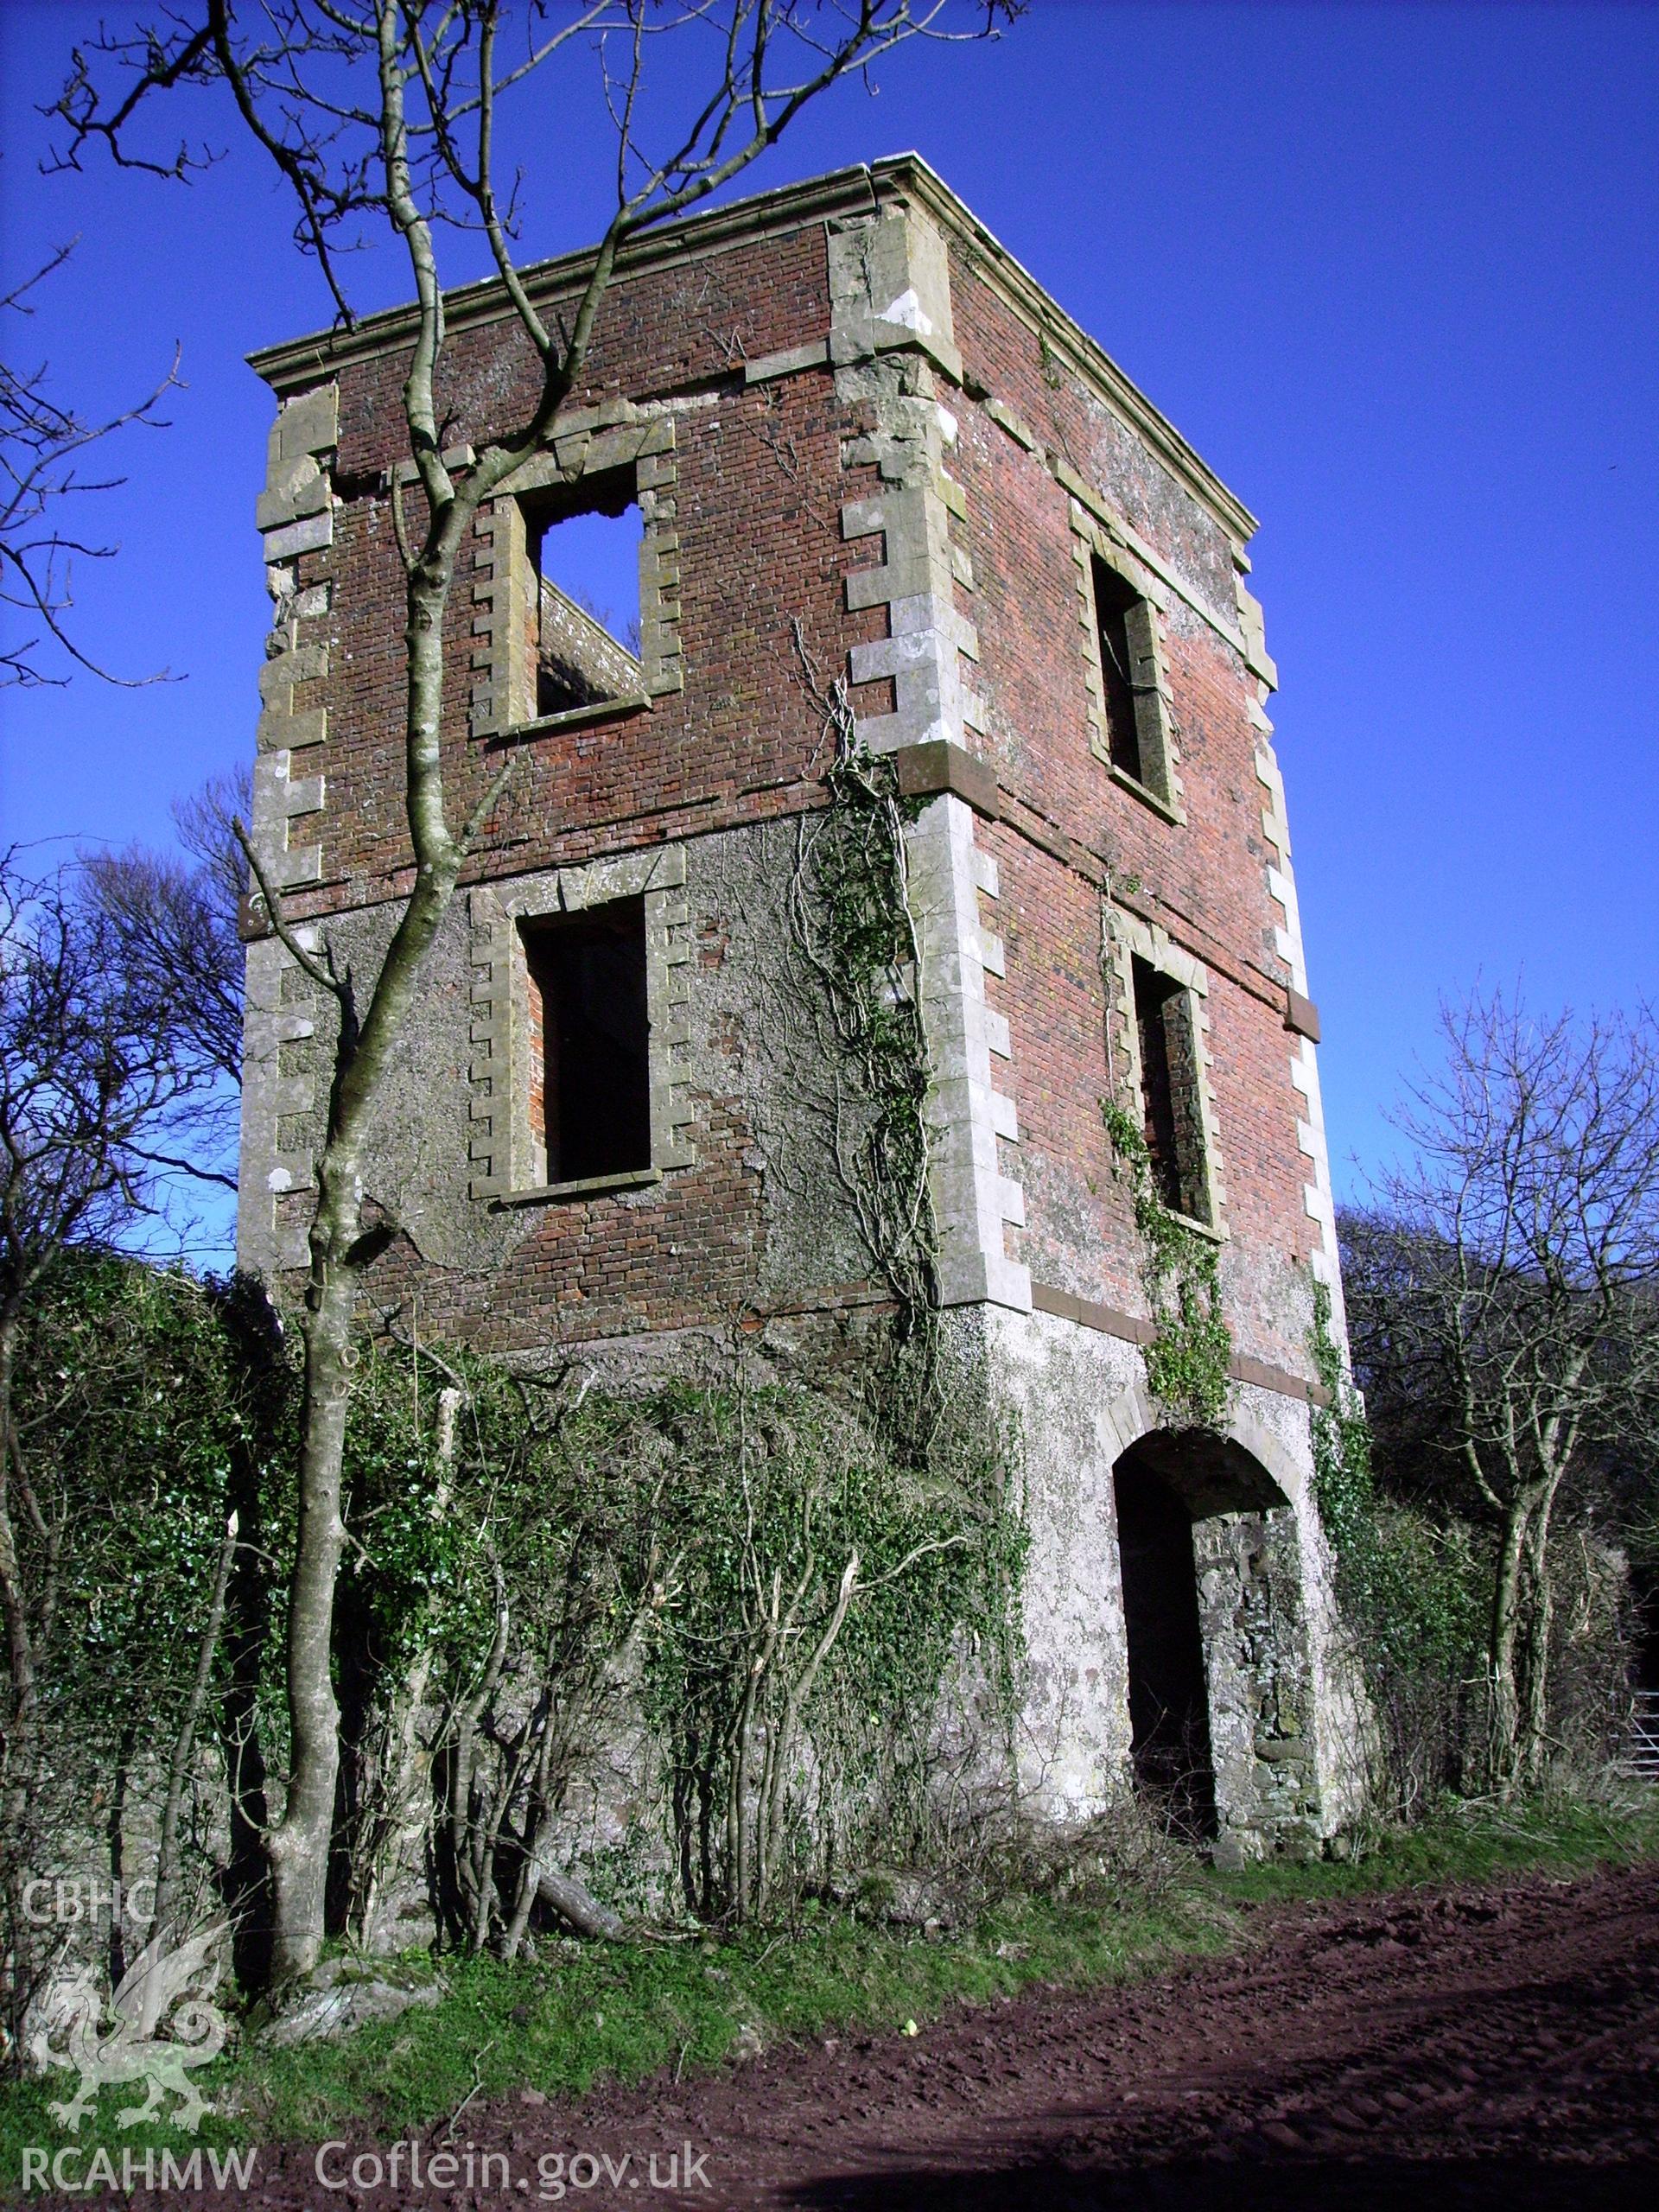 Digital photograph of Orielton Banqueting Tower.